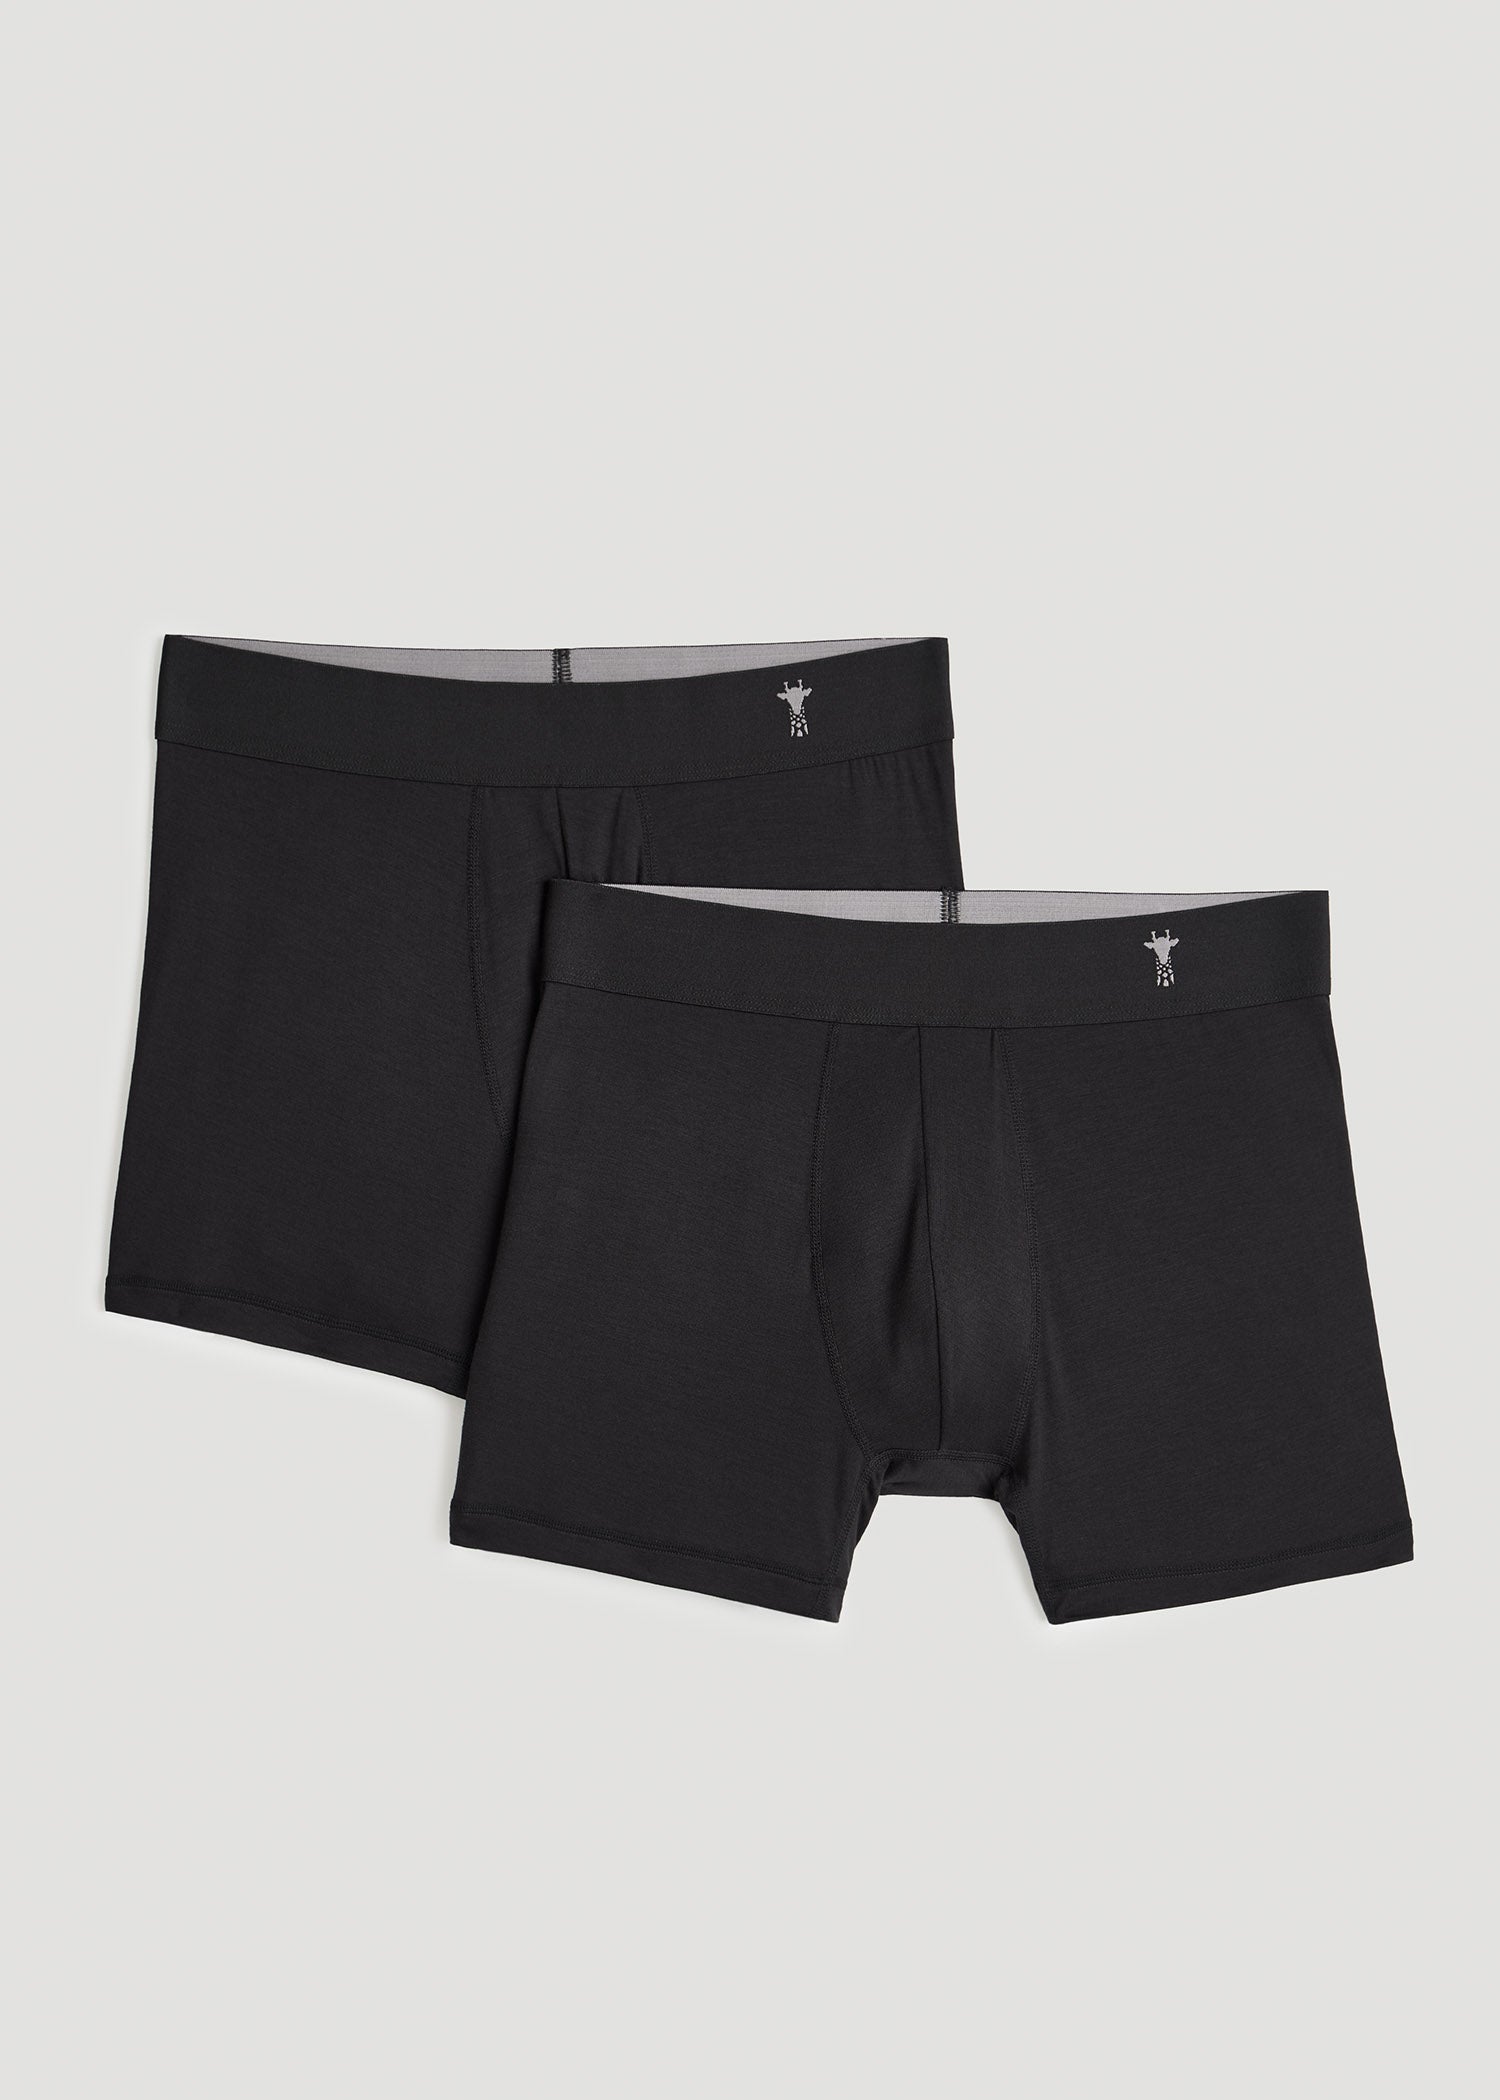 SuperSoft Boxer Brief 2 Pack